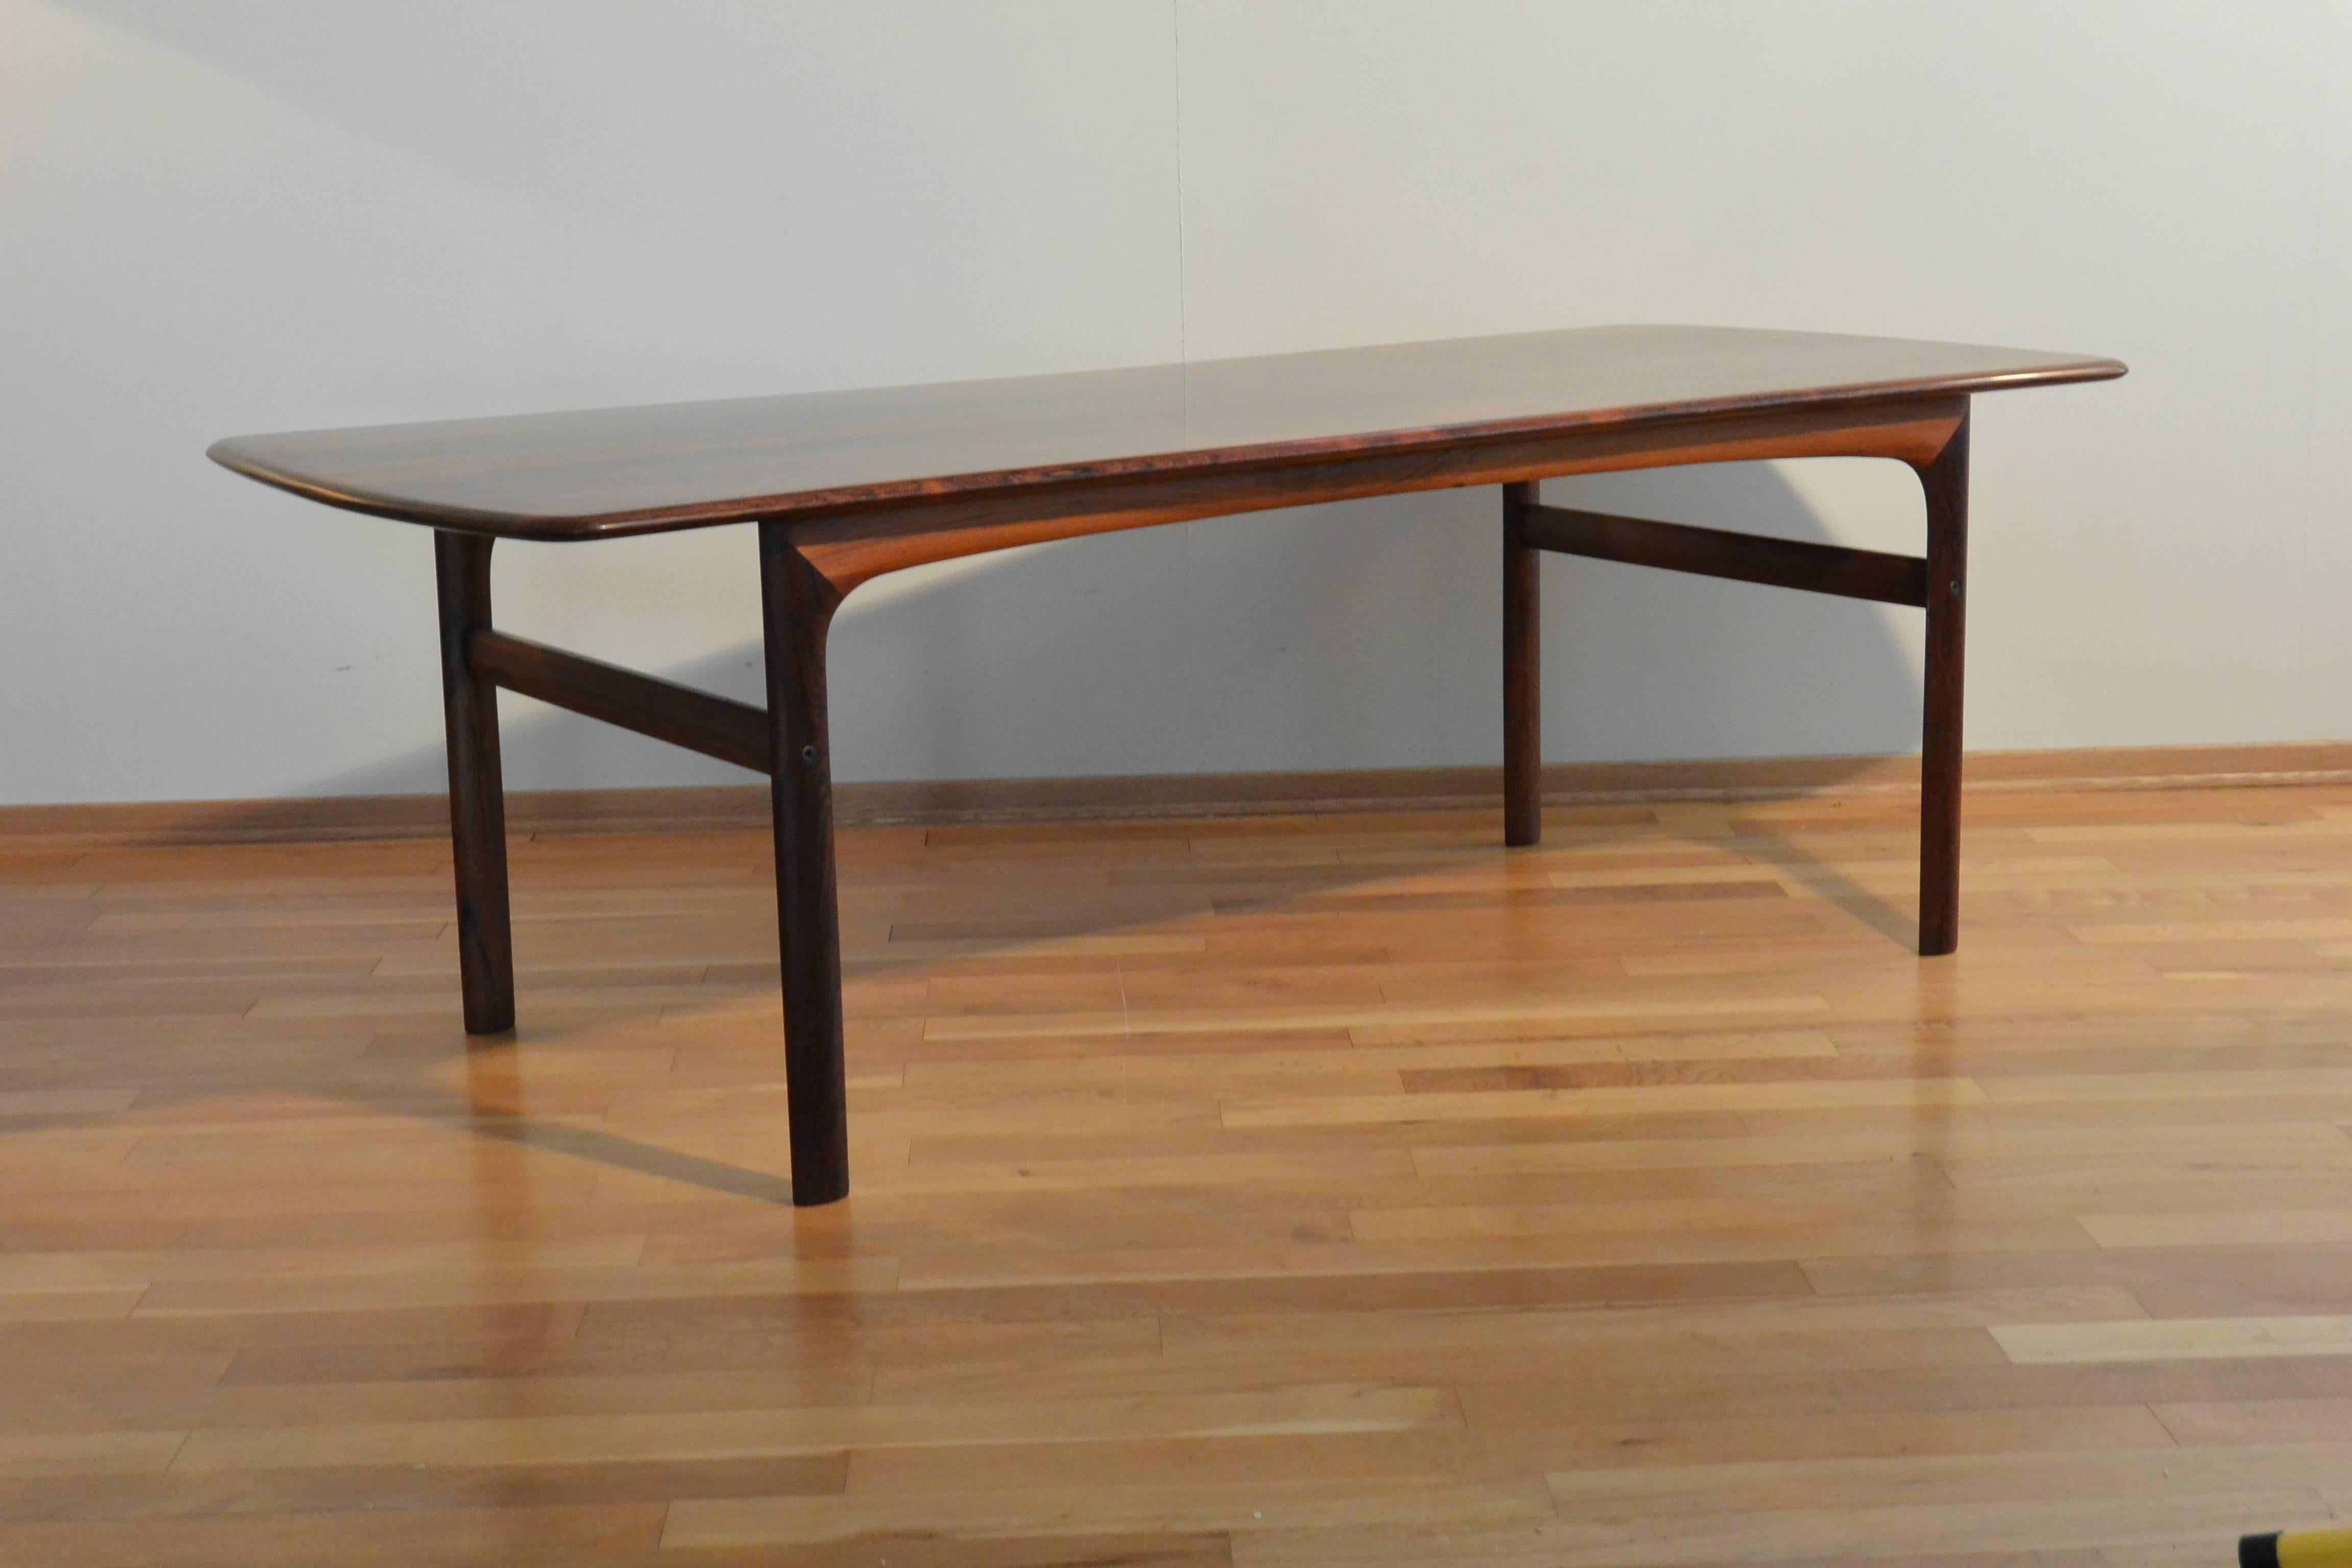 Beautiful solid rosewood Norwegian coffee or side table designed by Arne Halvorsen for manufacture by Rasmus Solberg, Norway.

Very good vintage condition with little use hence the radiant rosewood pattern.